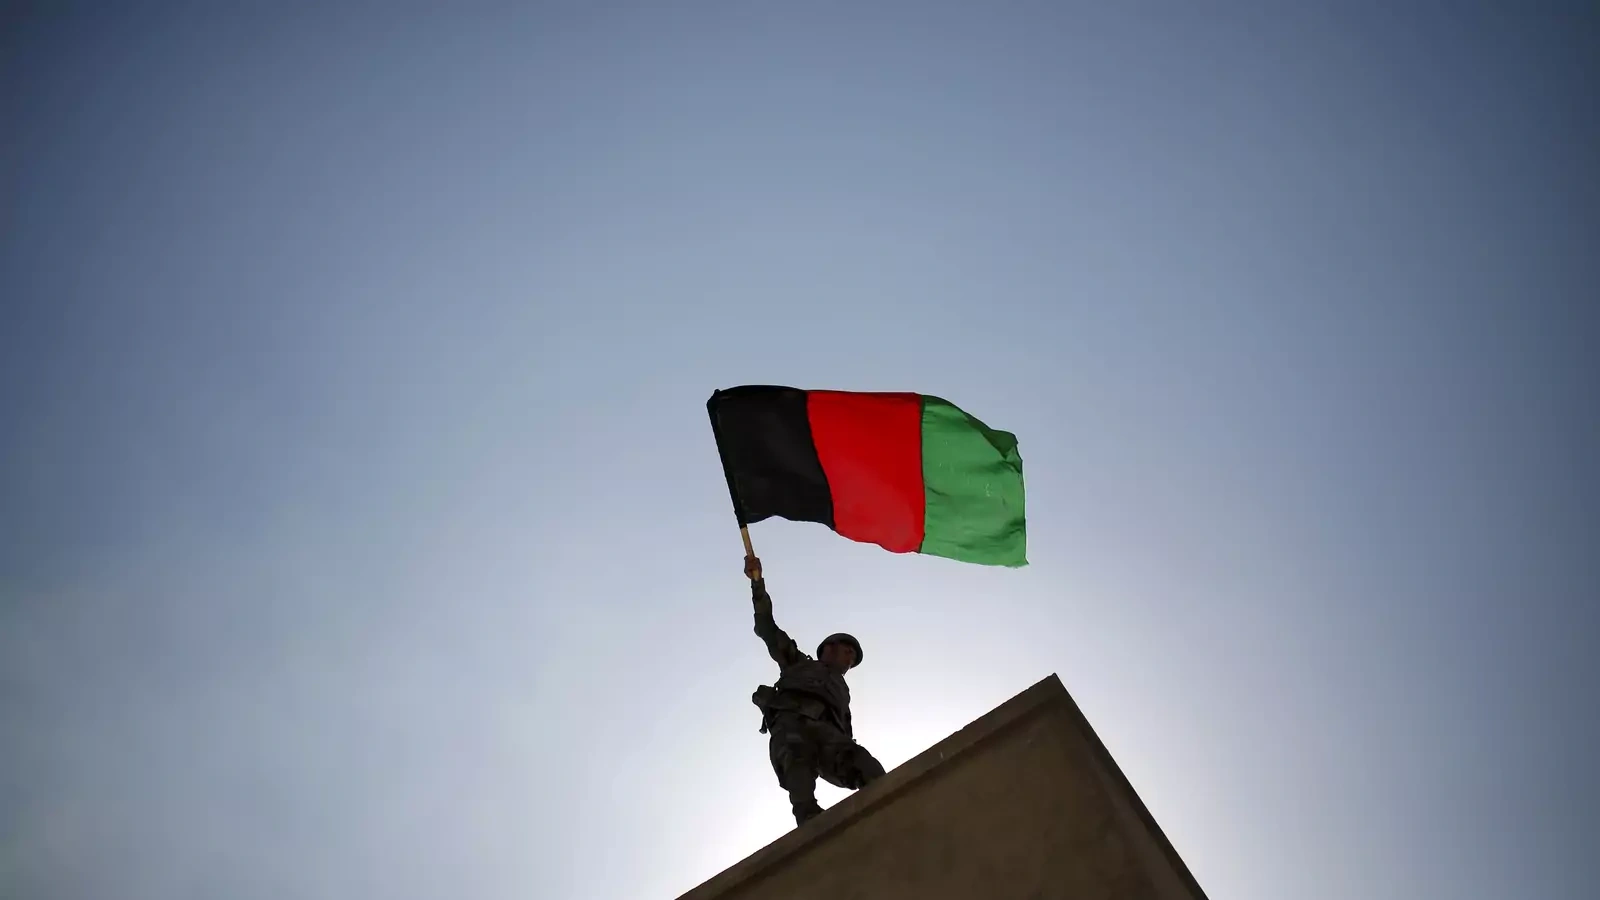 Newswise: Should the United States Leave Afghanistan?